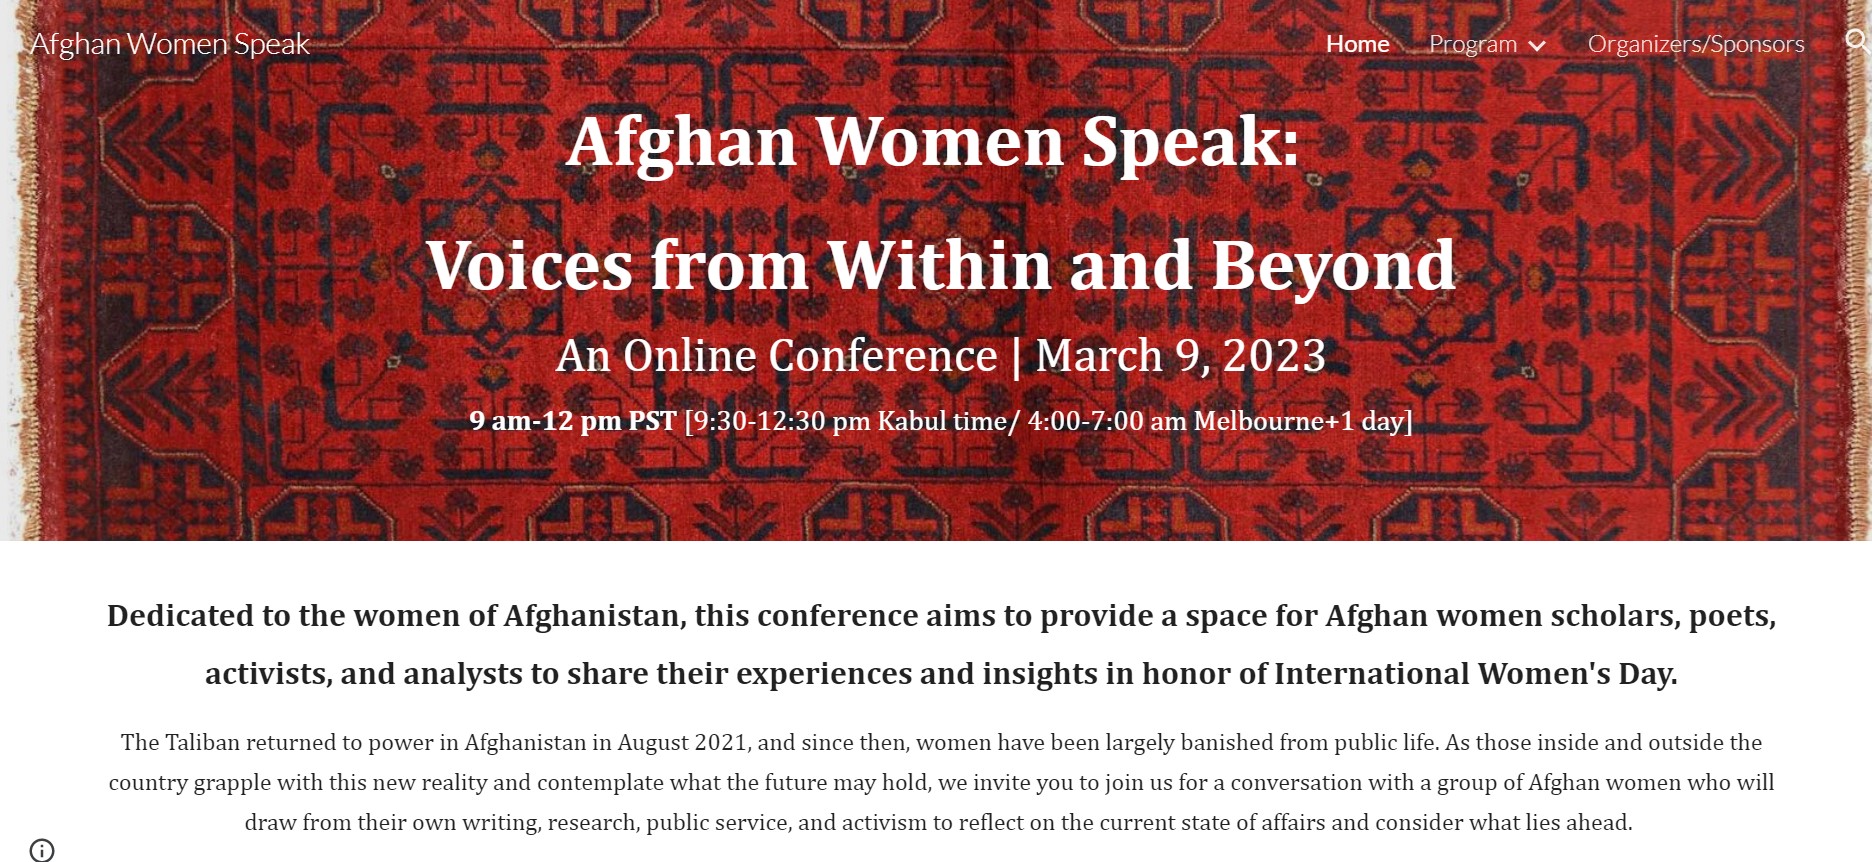 The image is a screenshot of website that is entitled Afghan Women Speak. It is about an online conference that will take place on March 9th, 2023 from 9 am to 12 noon Pacific Standard Time.